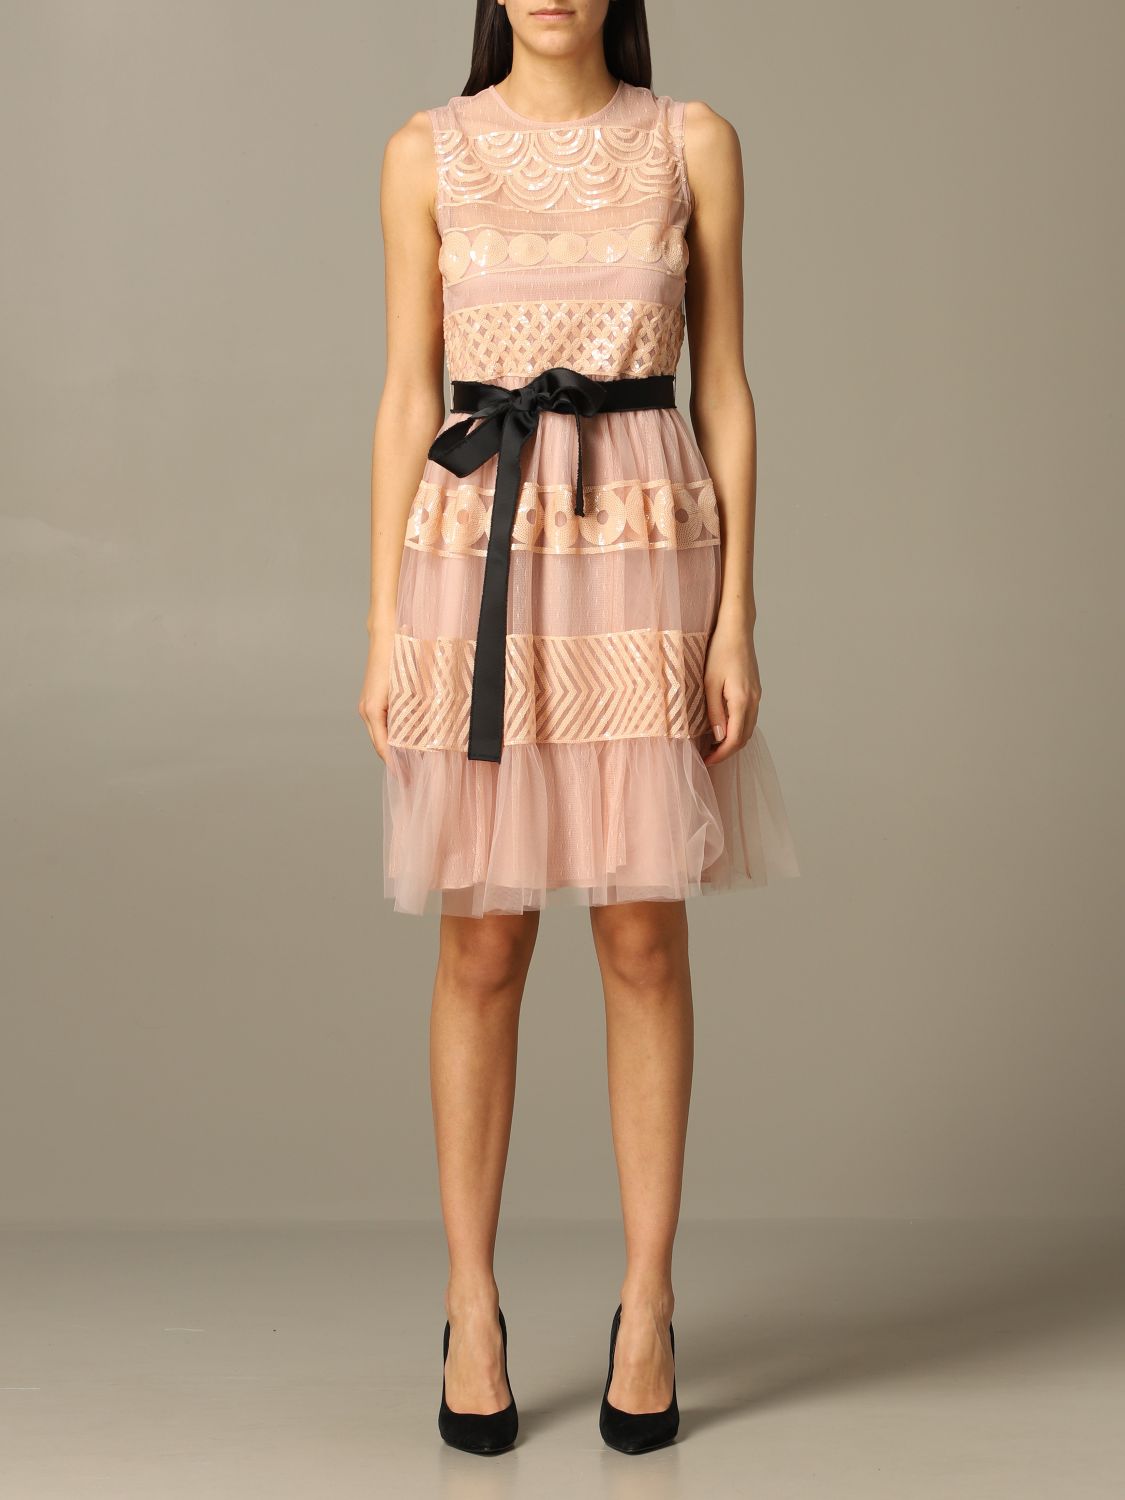 Red Valentino Abito Dress Outlet Sale ...